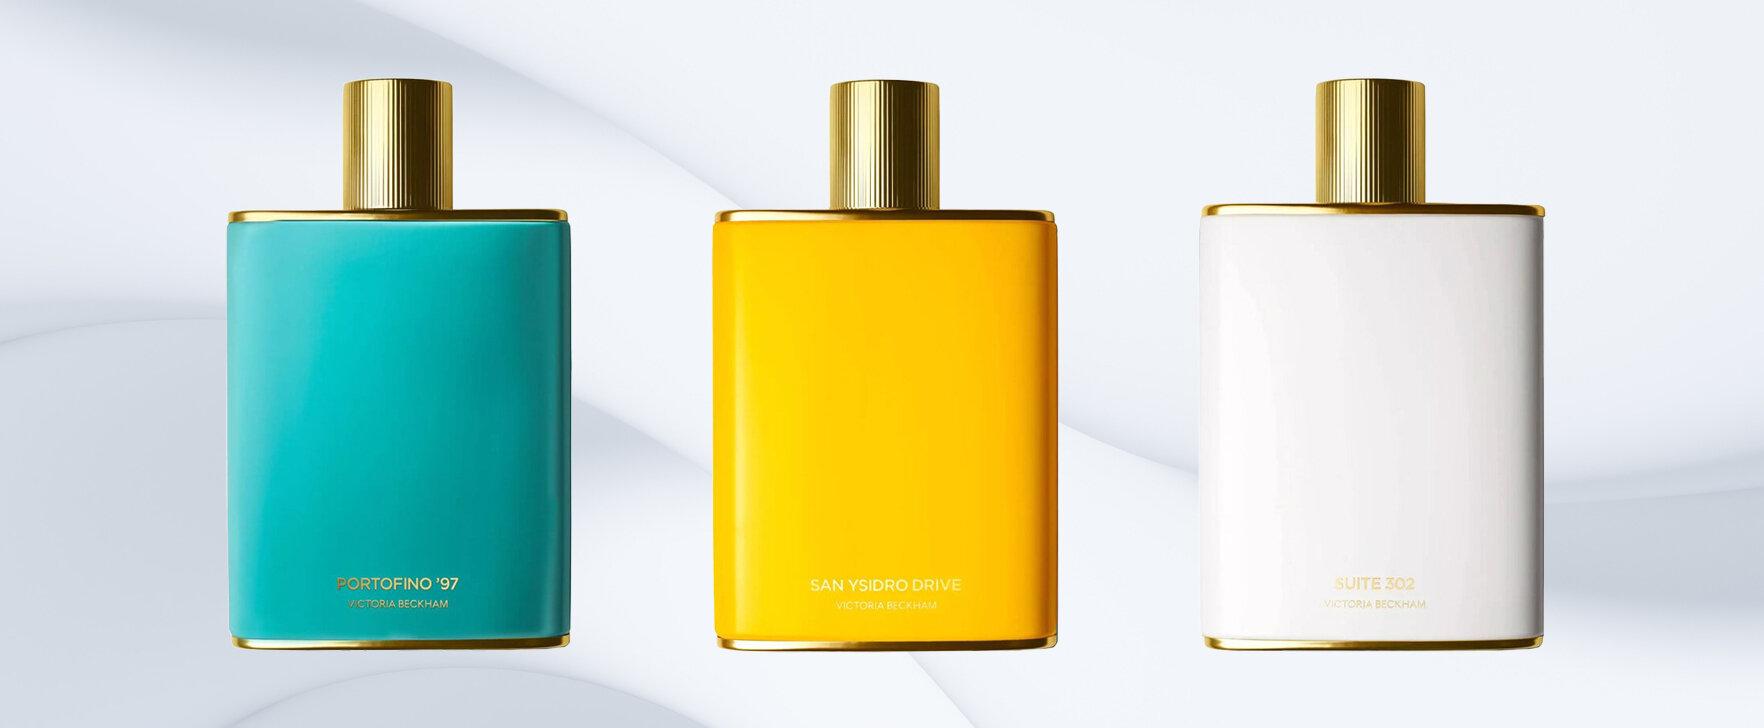 Fragrance Debut: Victoria Beckham's First Perfume Collection